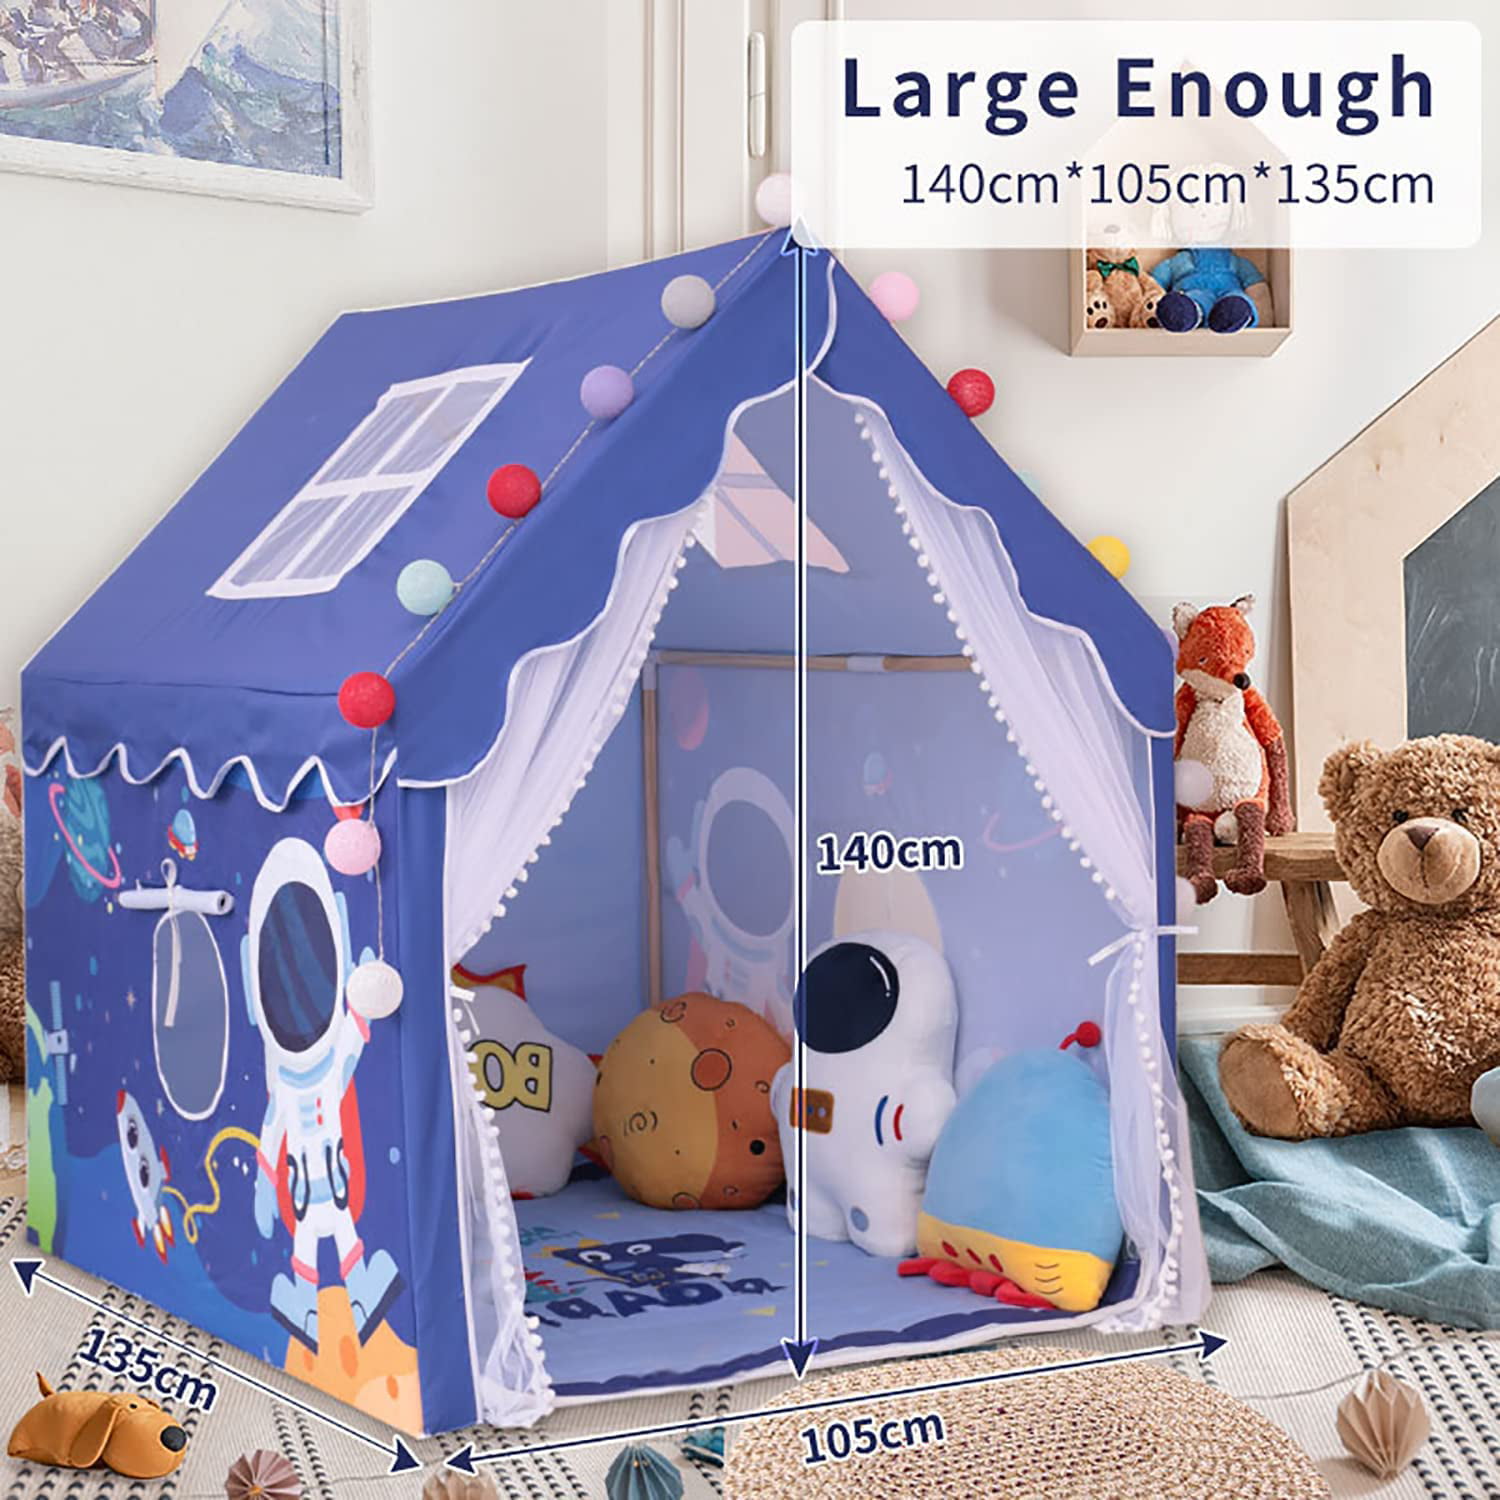 YOIKO Kids Tents Indoor Playhouses Boys 9.9Ft Star String Lights Blue Tent for Boys Upgraded Large Kids Indoor Tents and Playhouses Longer Curtain with Colorful Accessories Decoration 50.4 x 47.3 